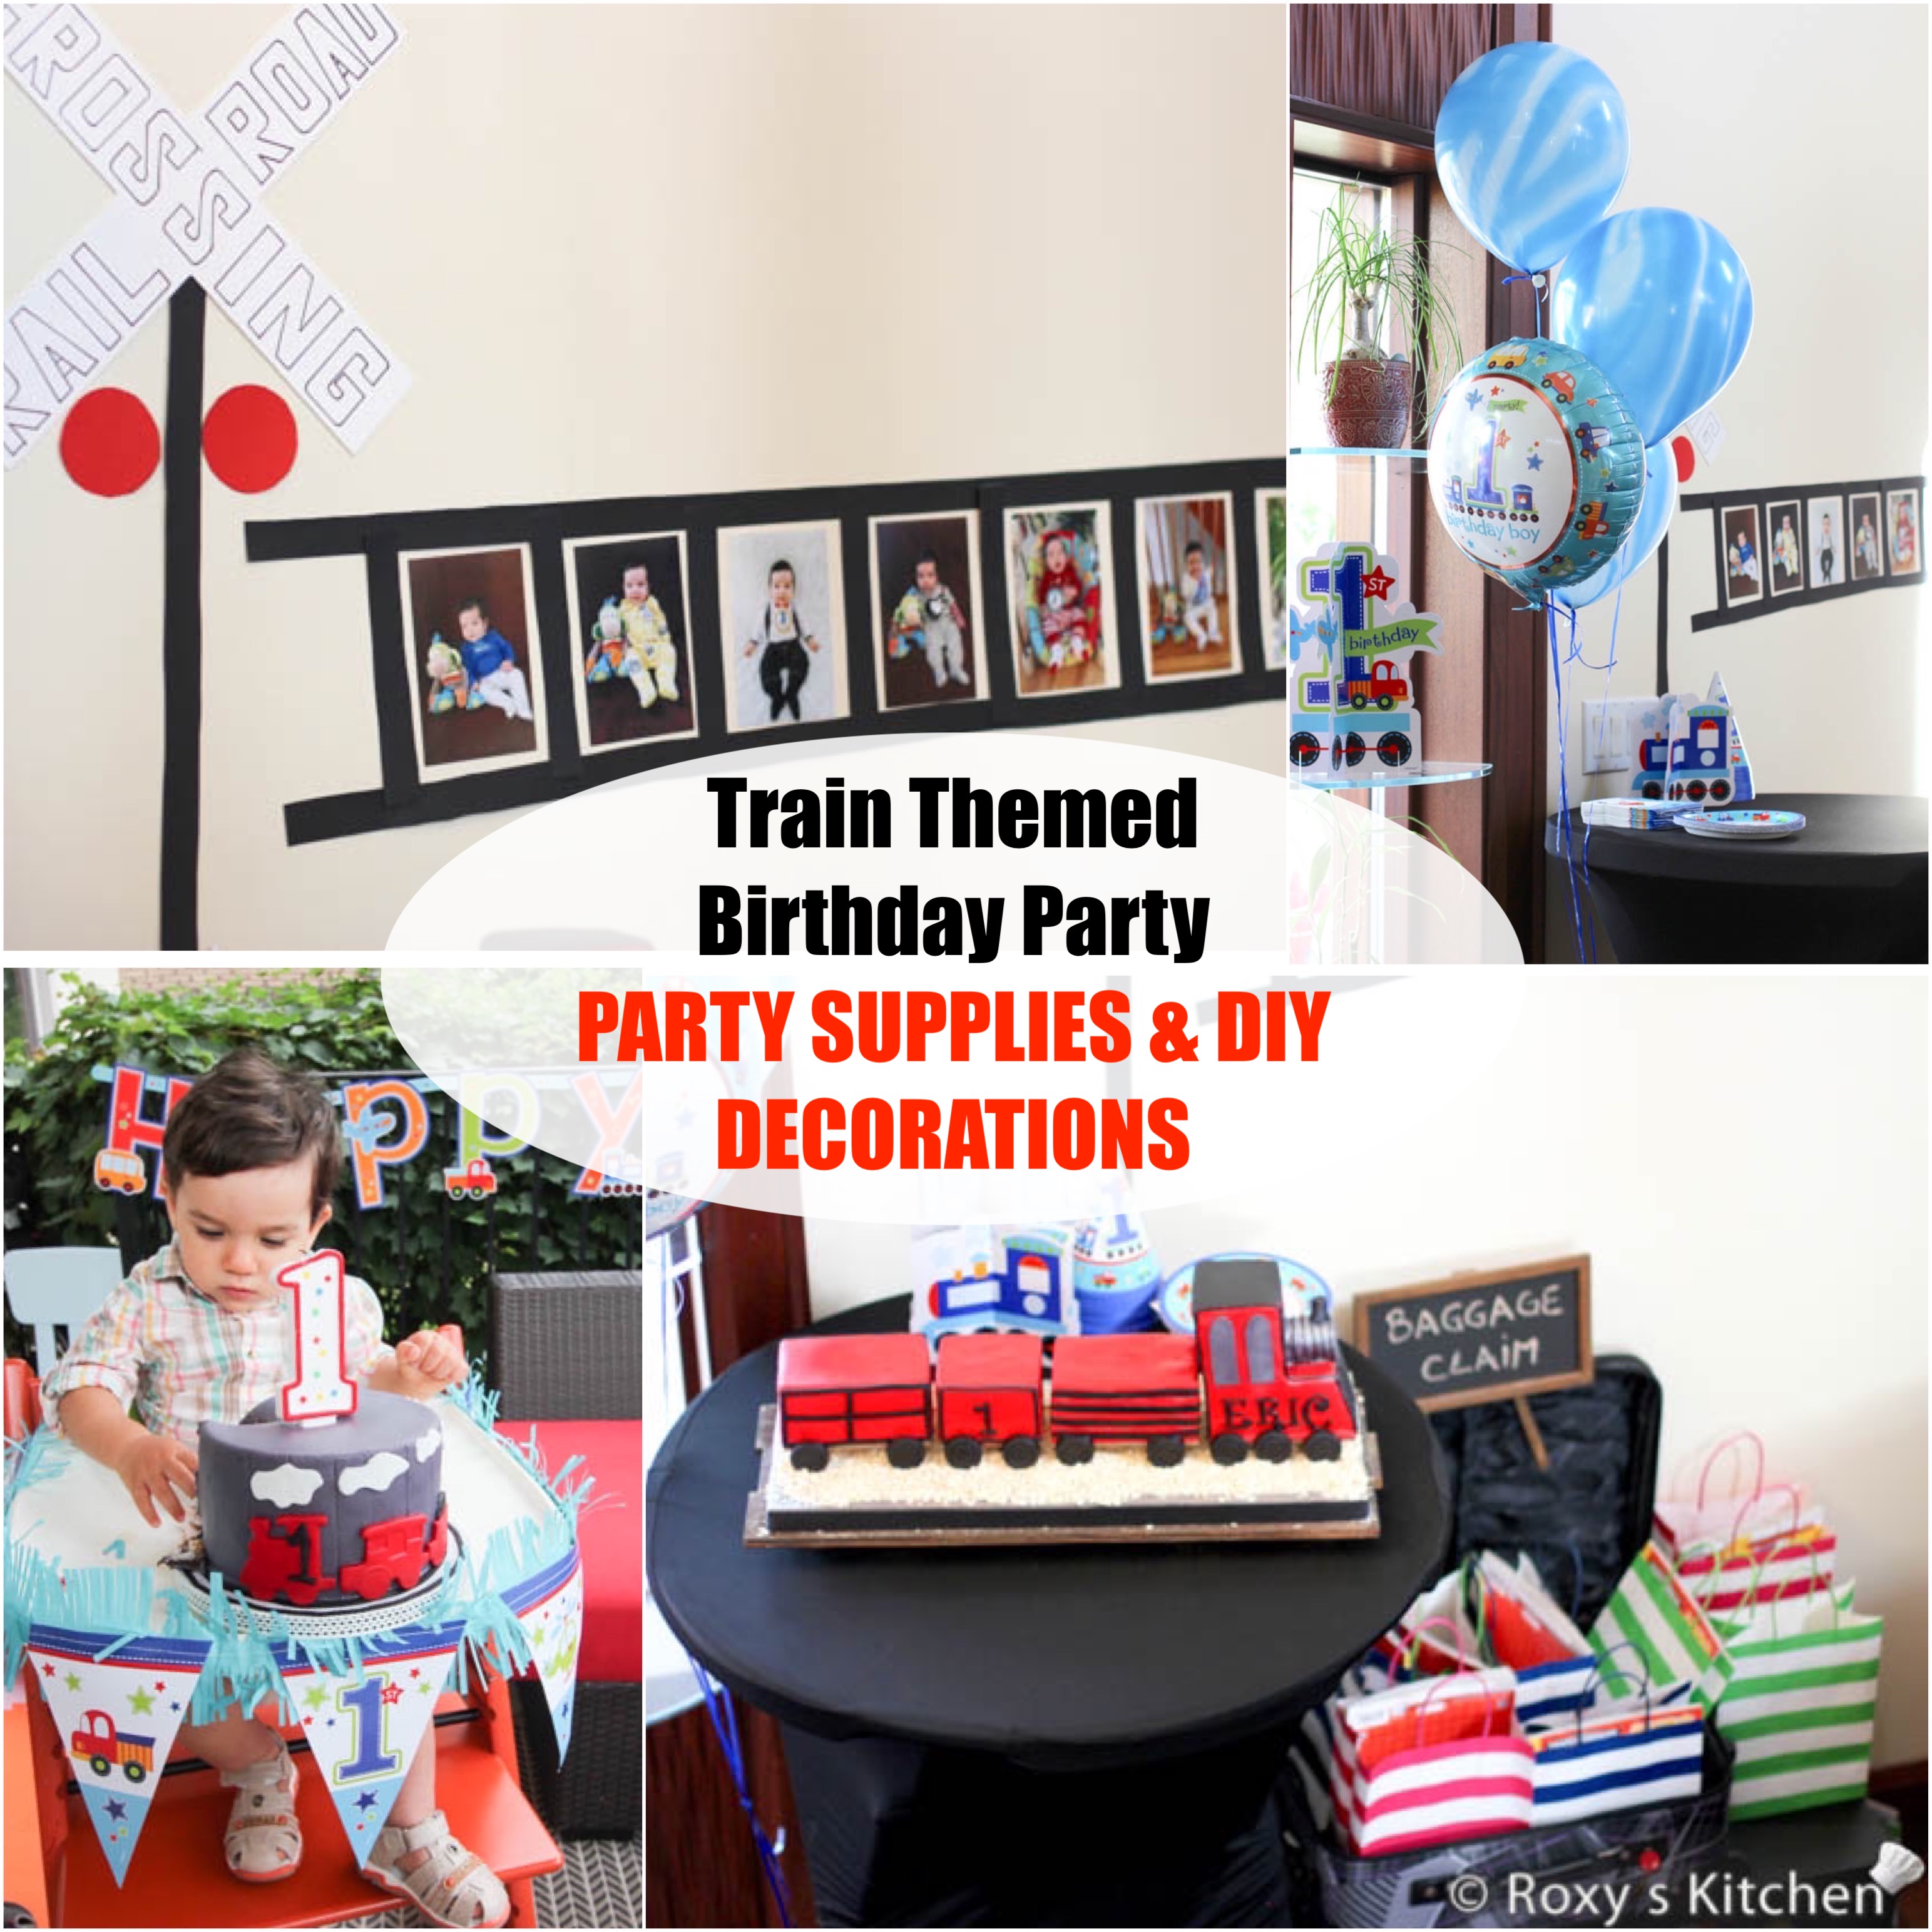 train-themed-birthday-party-party-supplies-diy-decorations-roxy-s